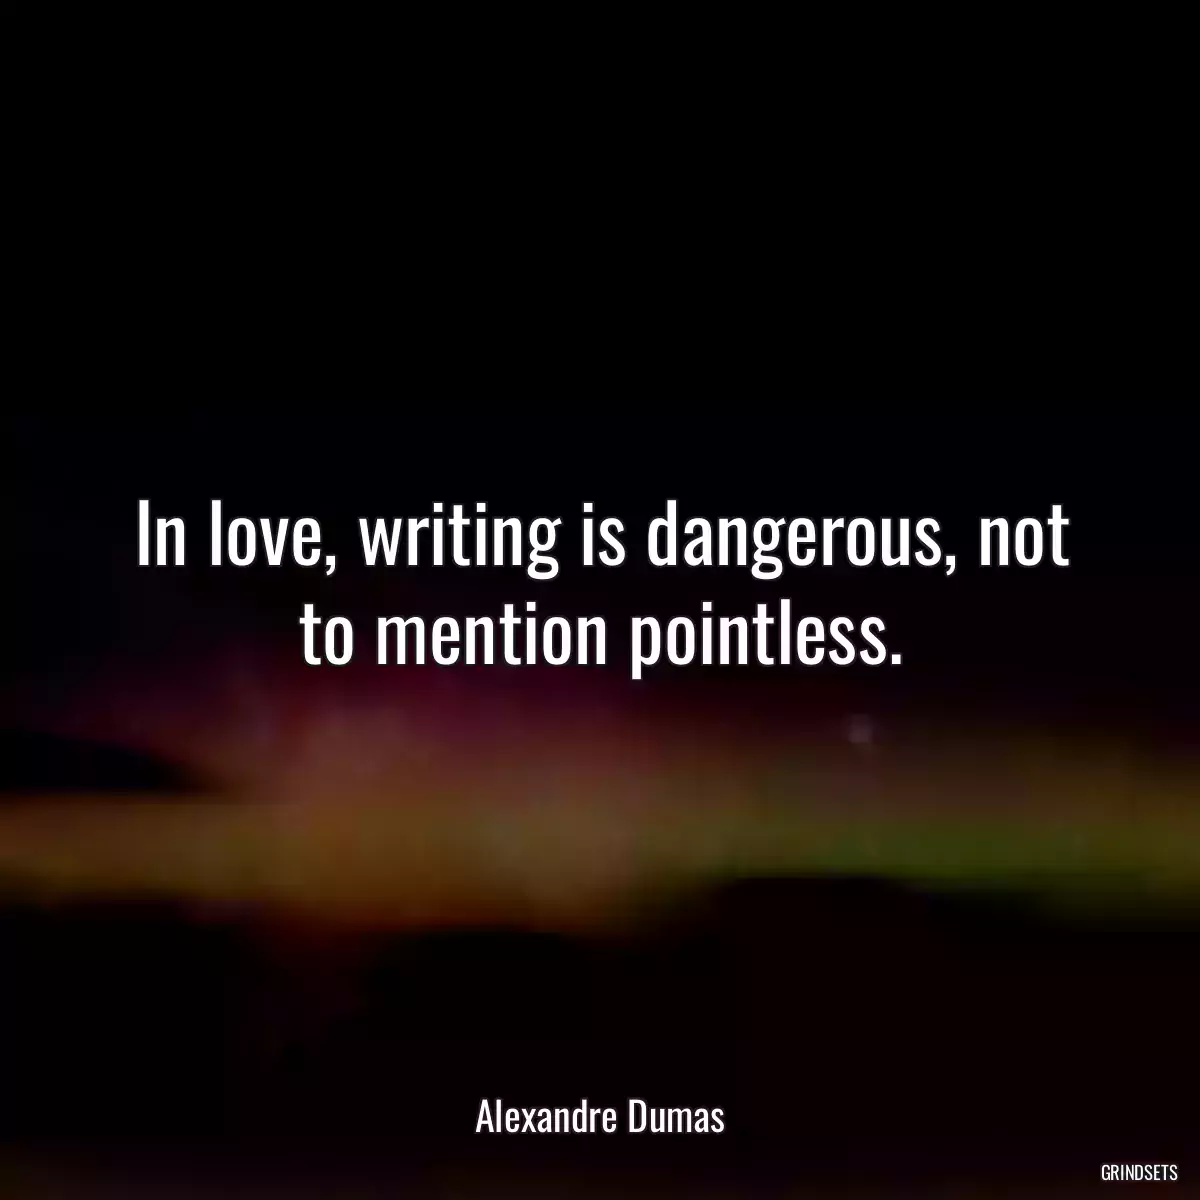 In love, writing is dangerous, not to mention pointless.